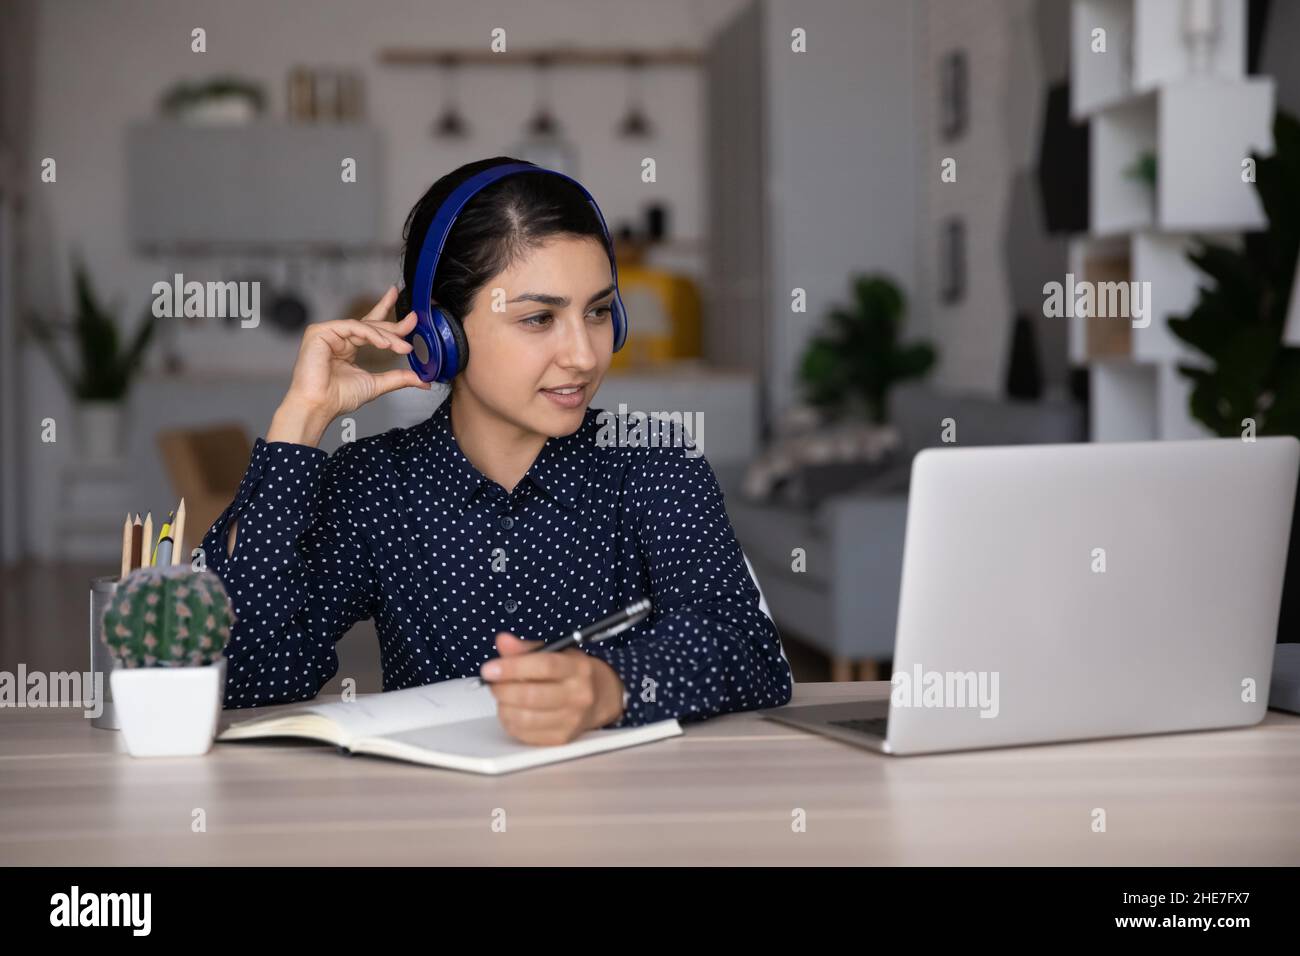 Focused smiling Indian student girl in headphones studying from home Stock Photo